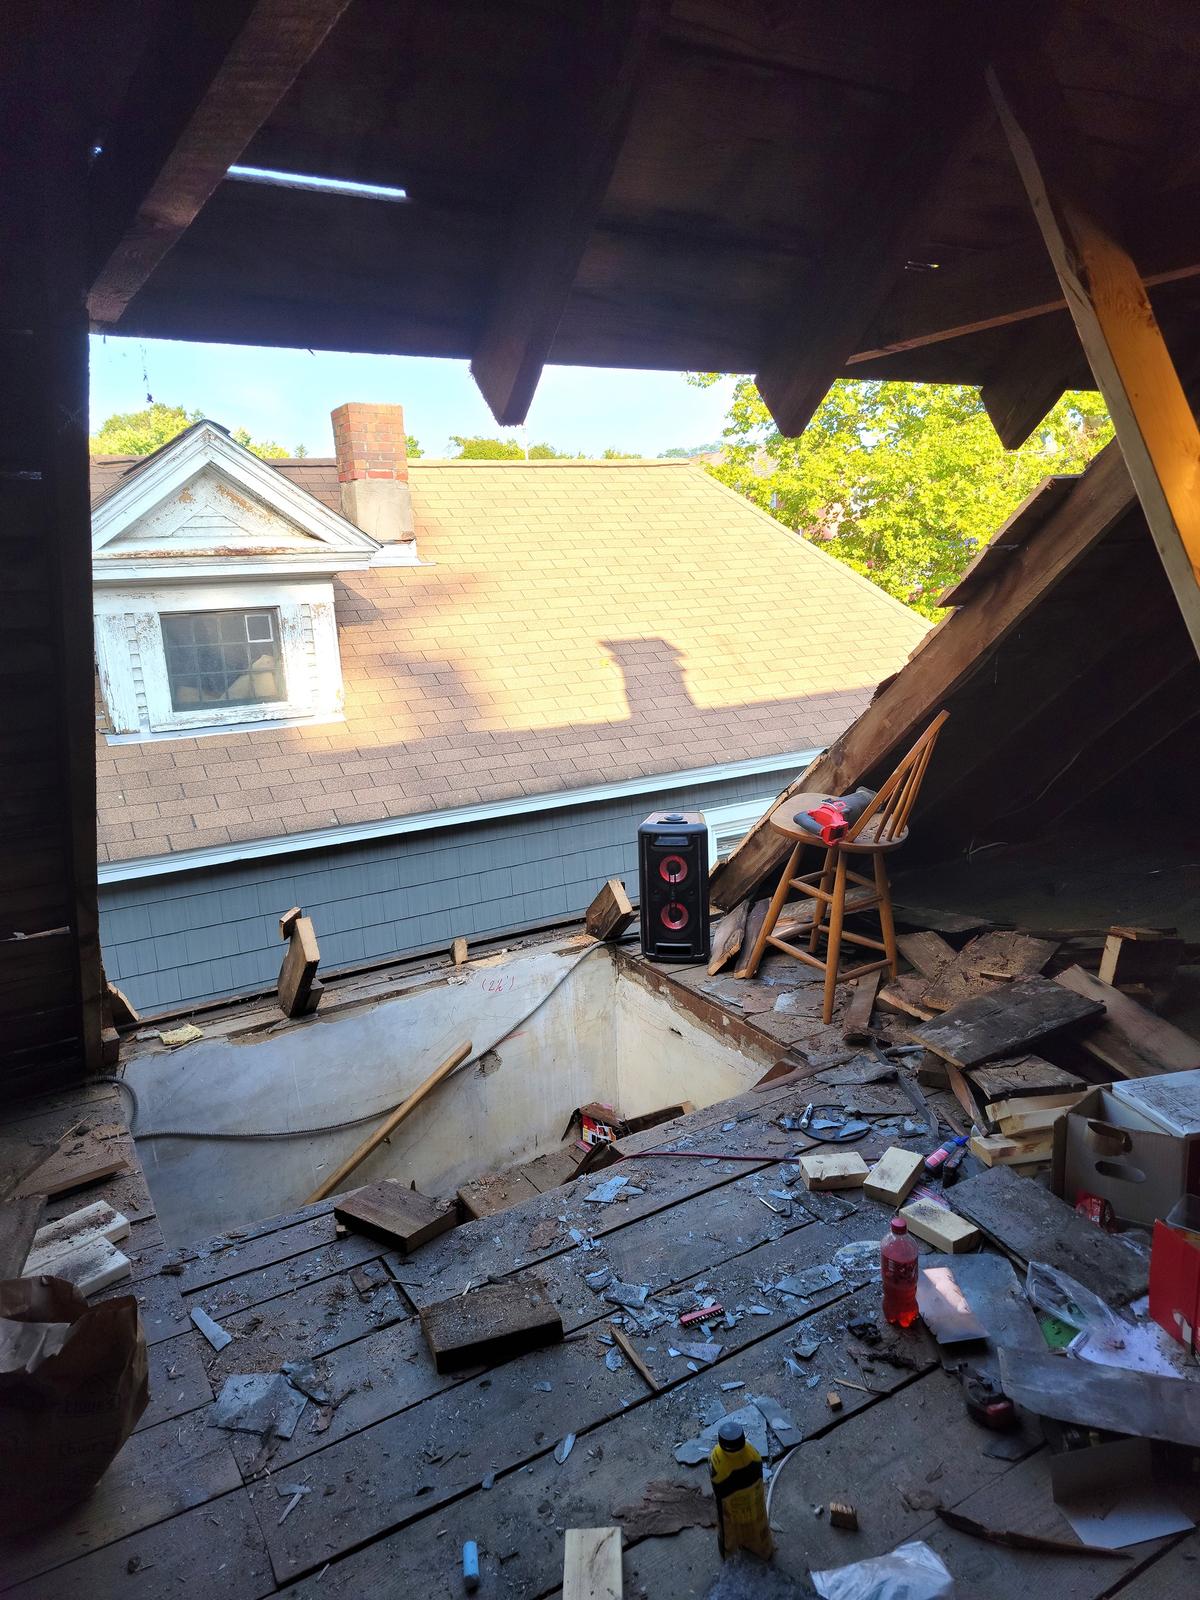 Imagine a mother of three young boys cutting a hole in her roof like this to create a dormer. If she can do a big job like this, so can you. (Tim Carter/Tribune Content Agency/TNS)